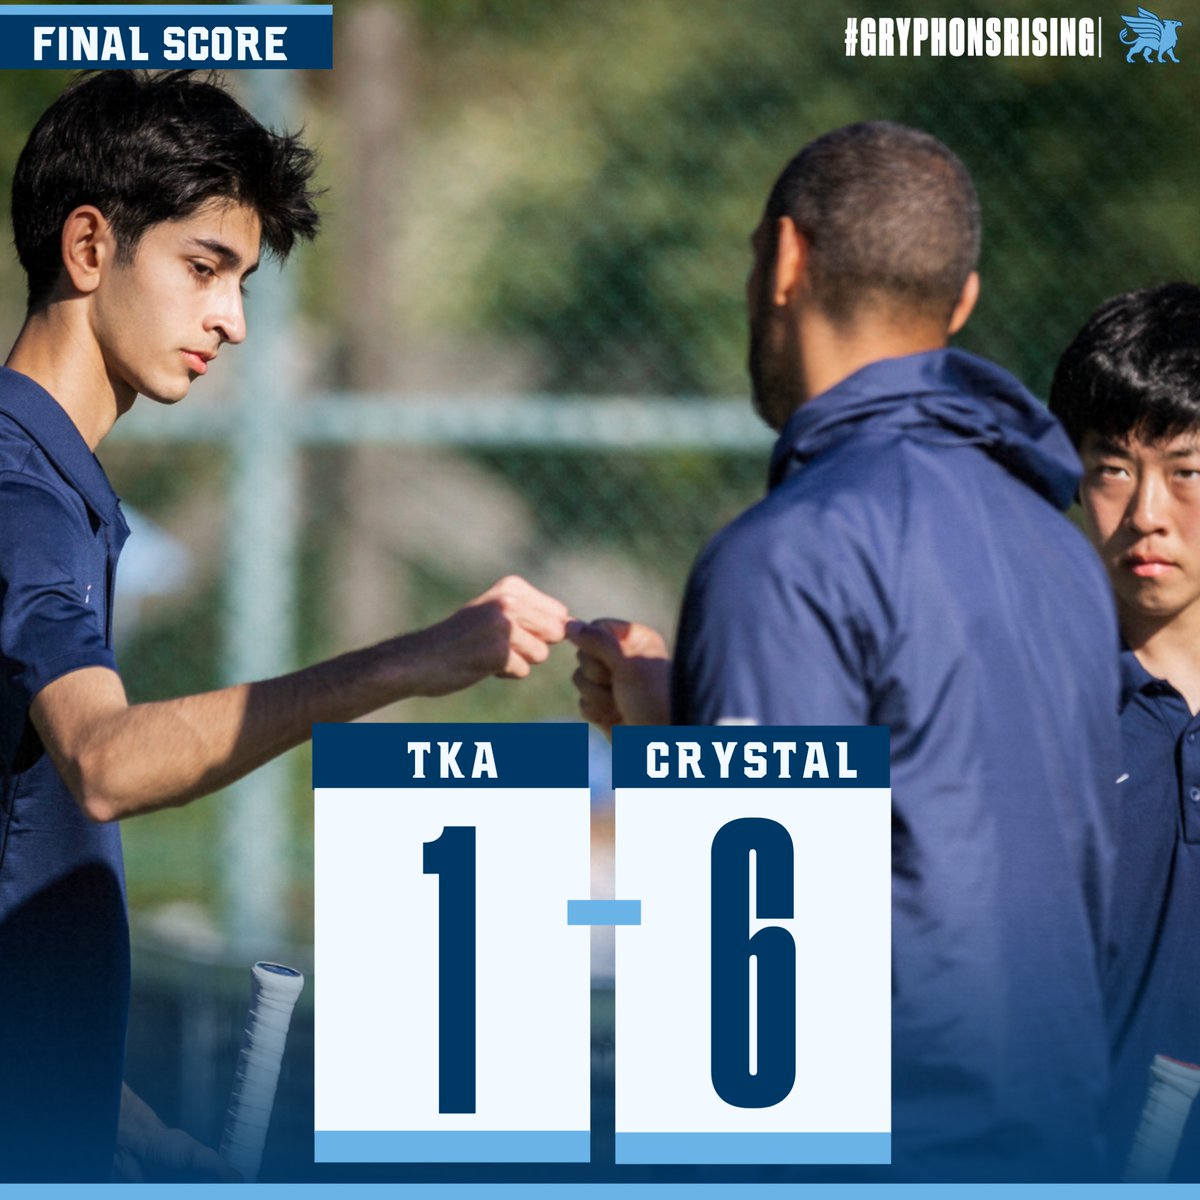 Two days, two wins for Crystal Tennis!